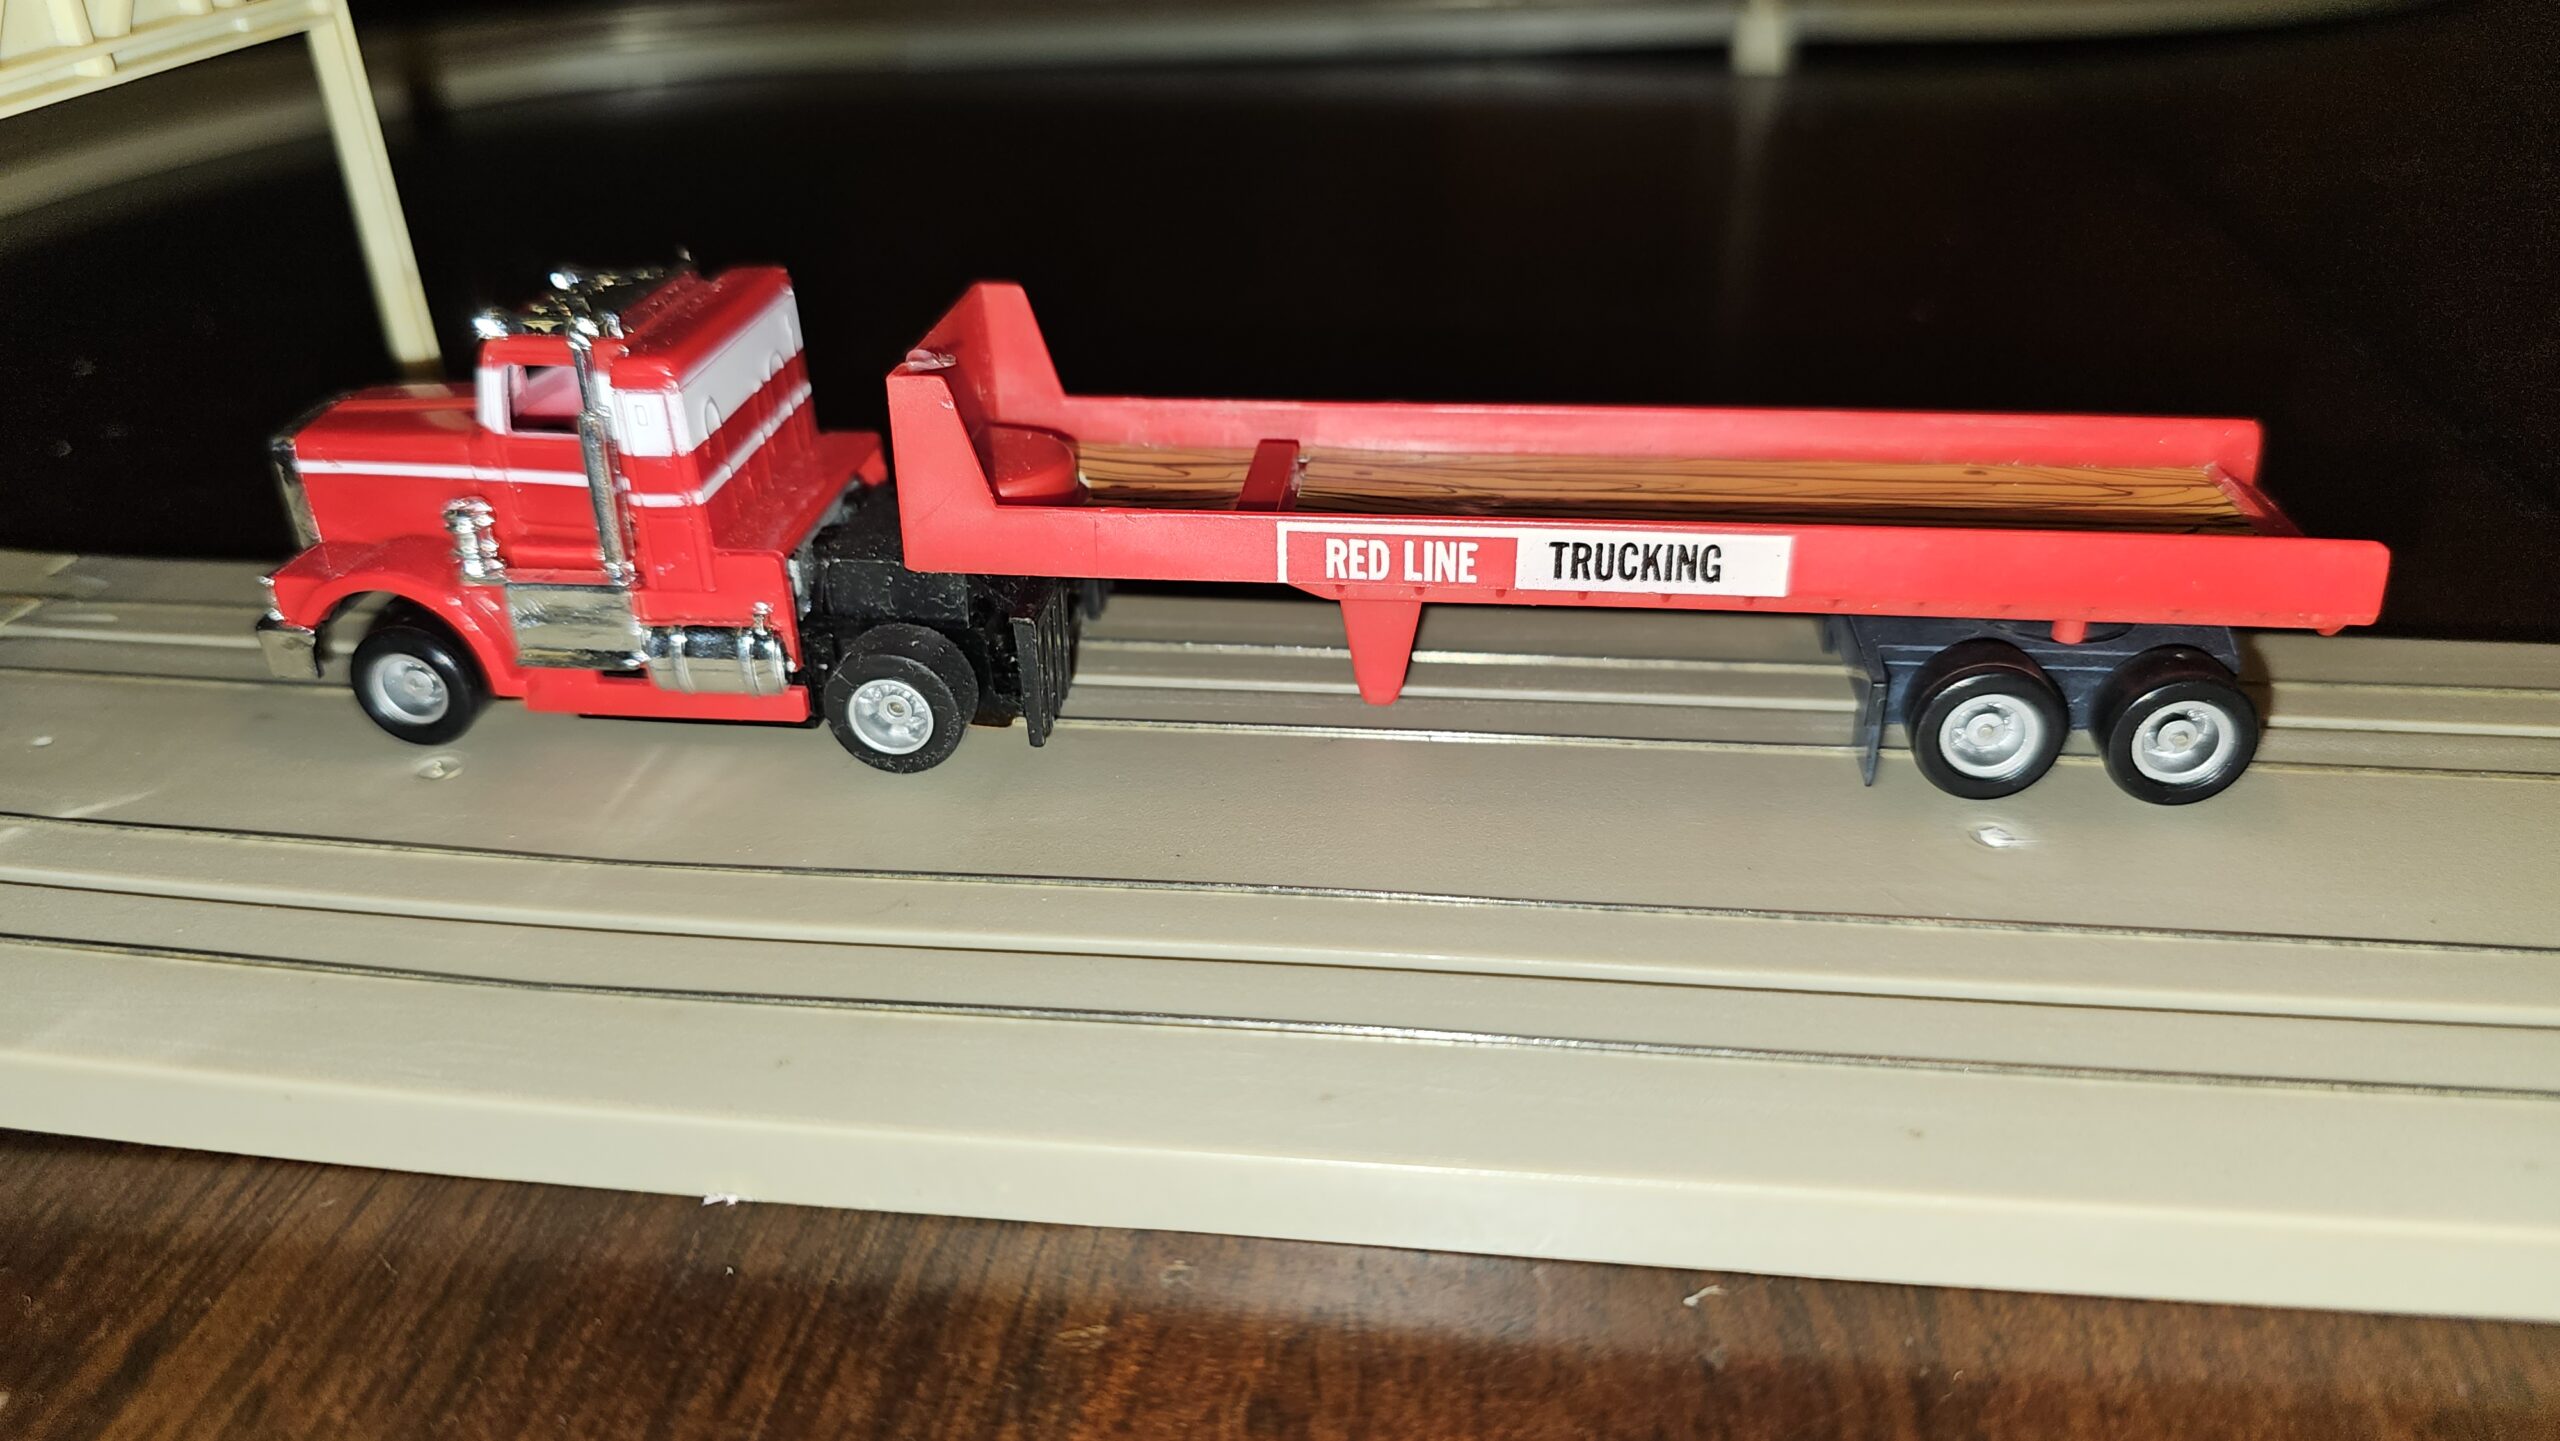 Tyco US1 Trucking Red and white striped Peterbilt semi truck with Red Line Trucking crate flatbed trailer